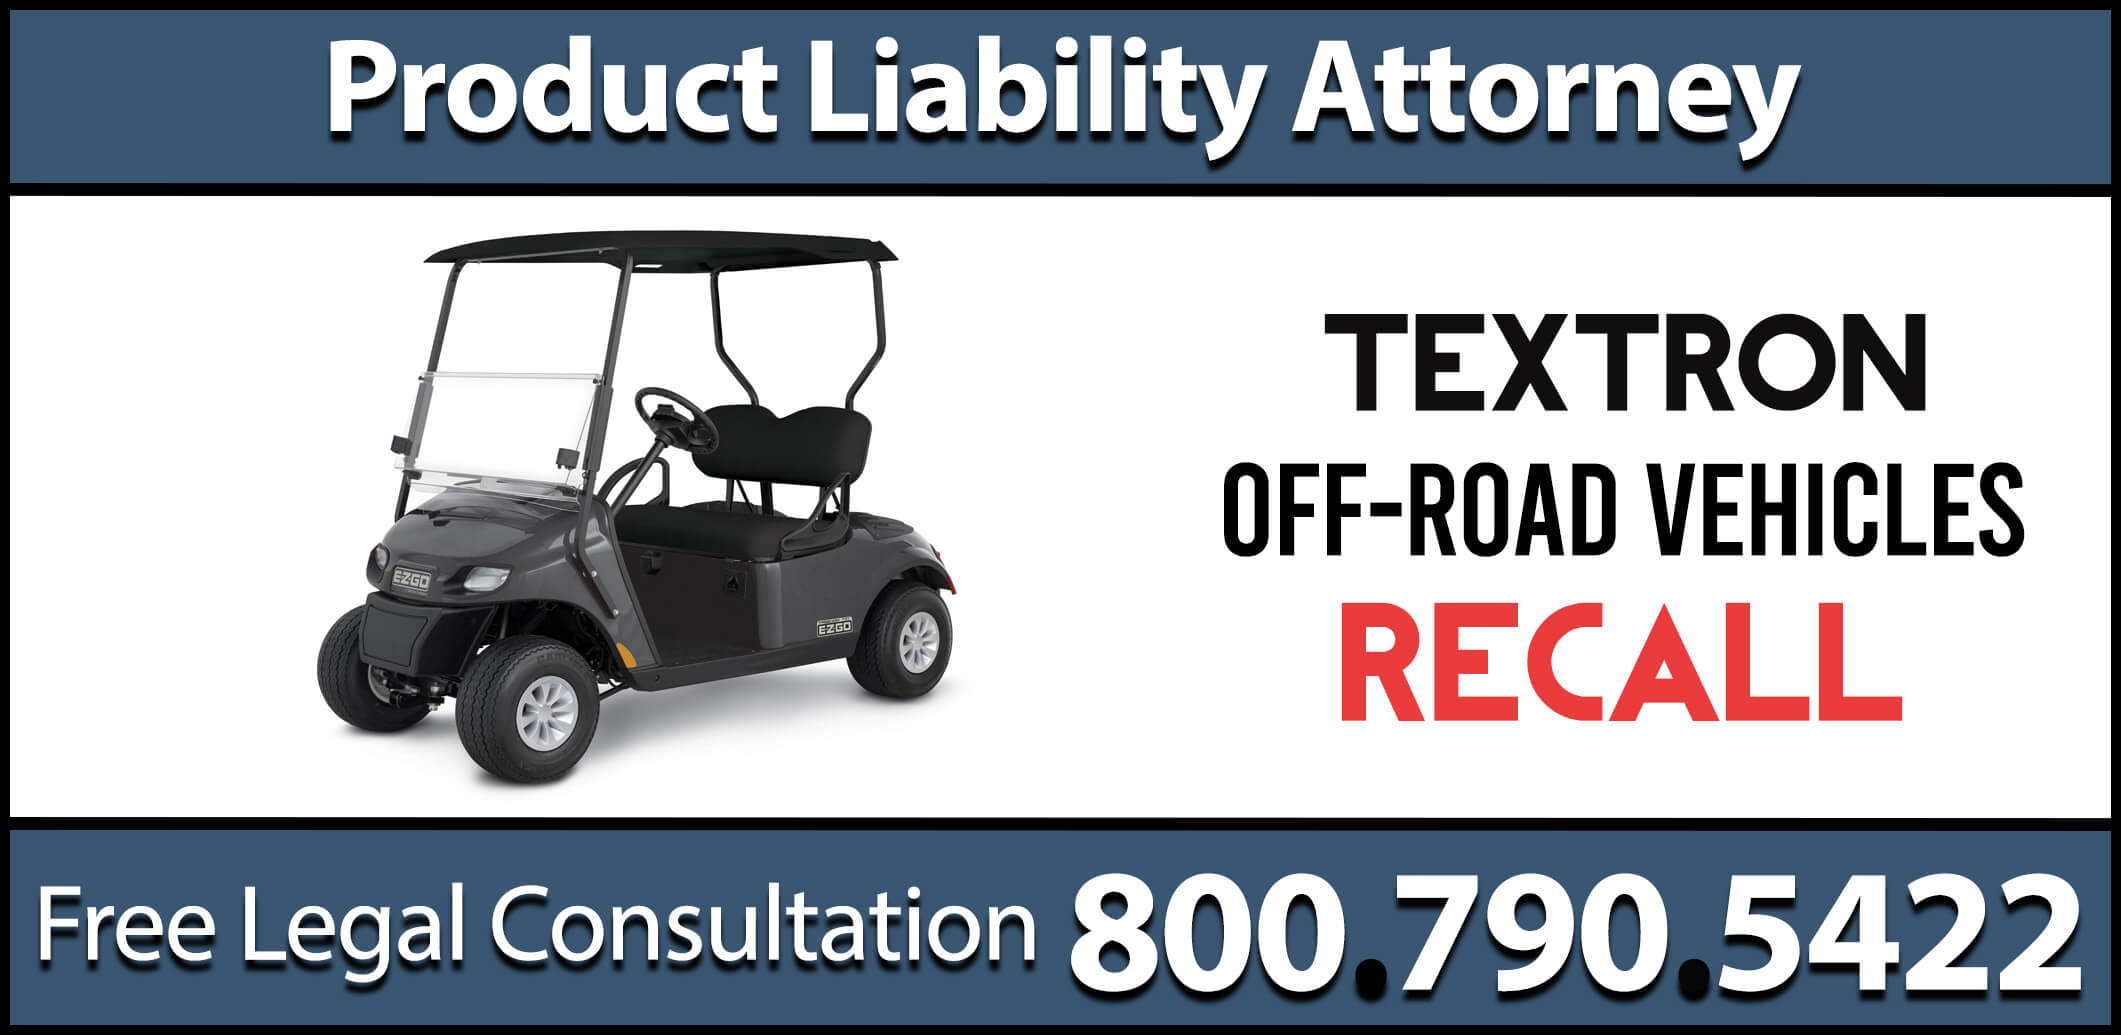 textron off road vehicle recall injury accident product liability attorney lawyer sue compensation maximum liability defective accident